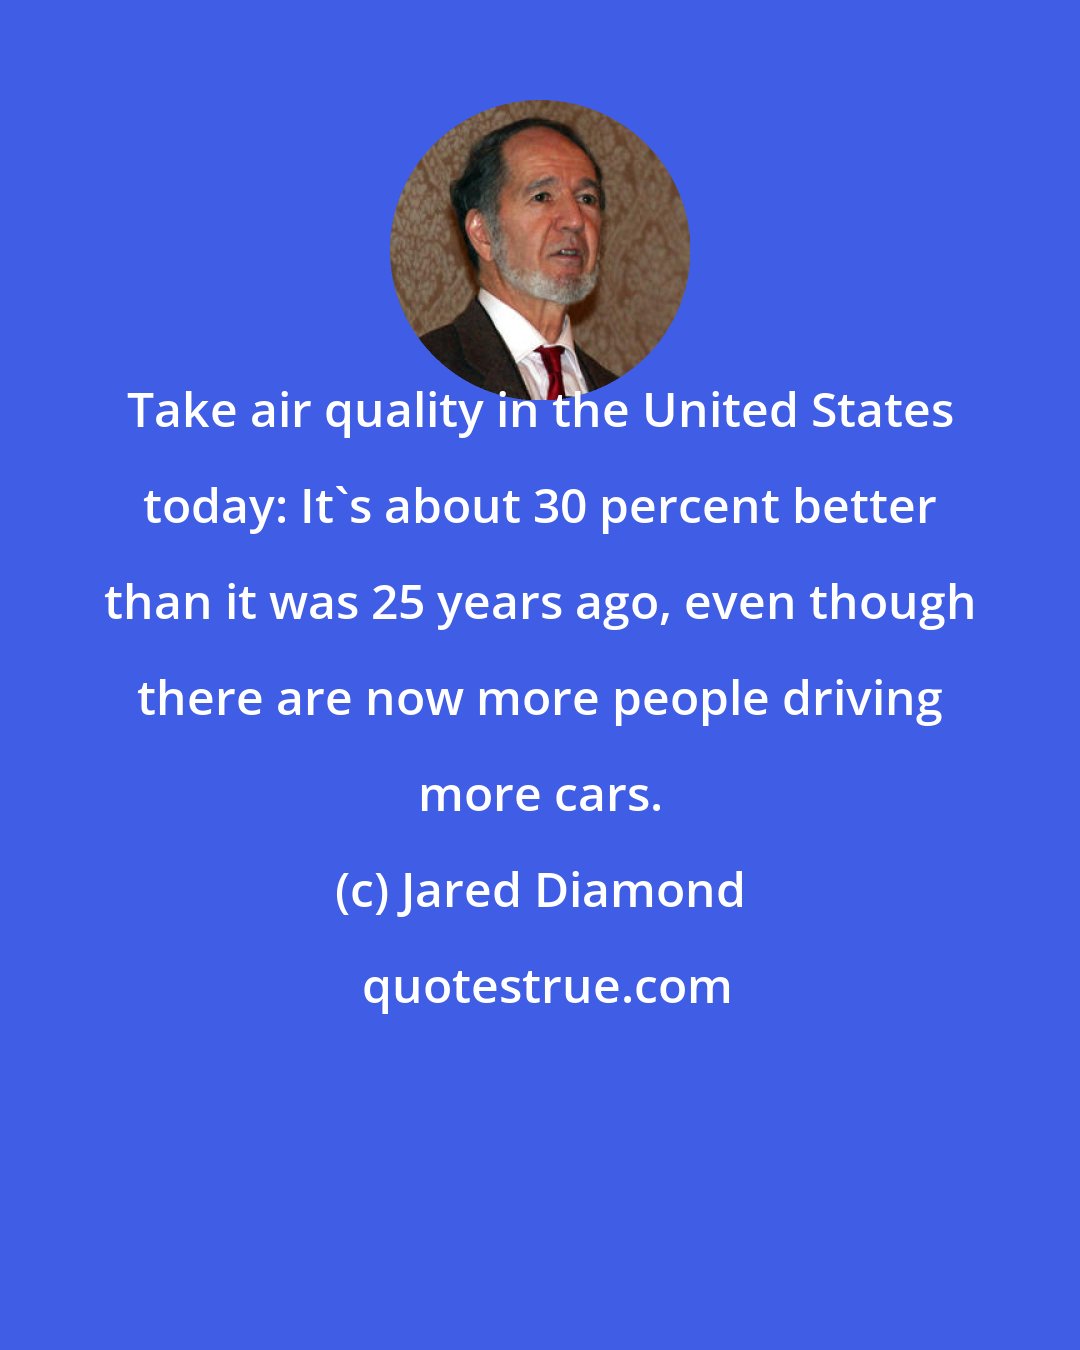 Jared Diamond: Take air quality in the United States today: It's about 30 percent better than it was 25 years ago, even though there are now more people driving more cars.